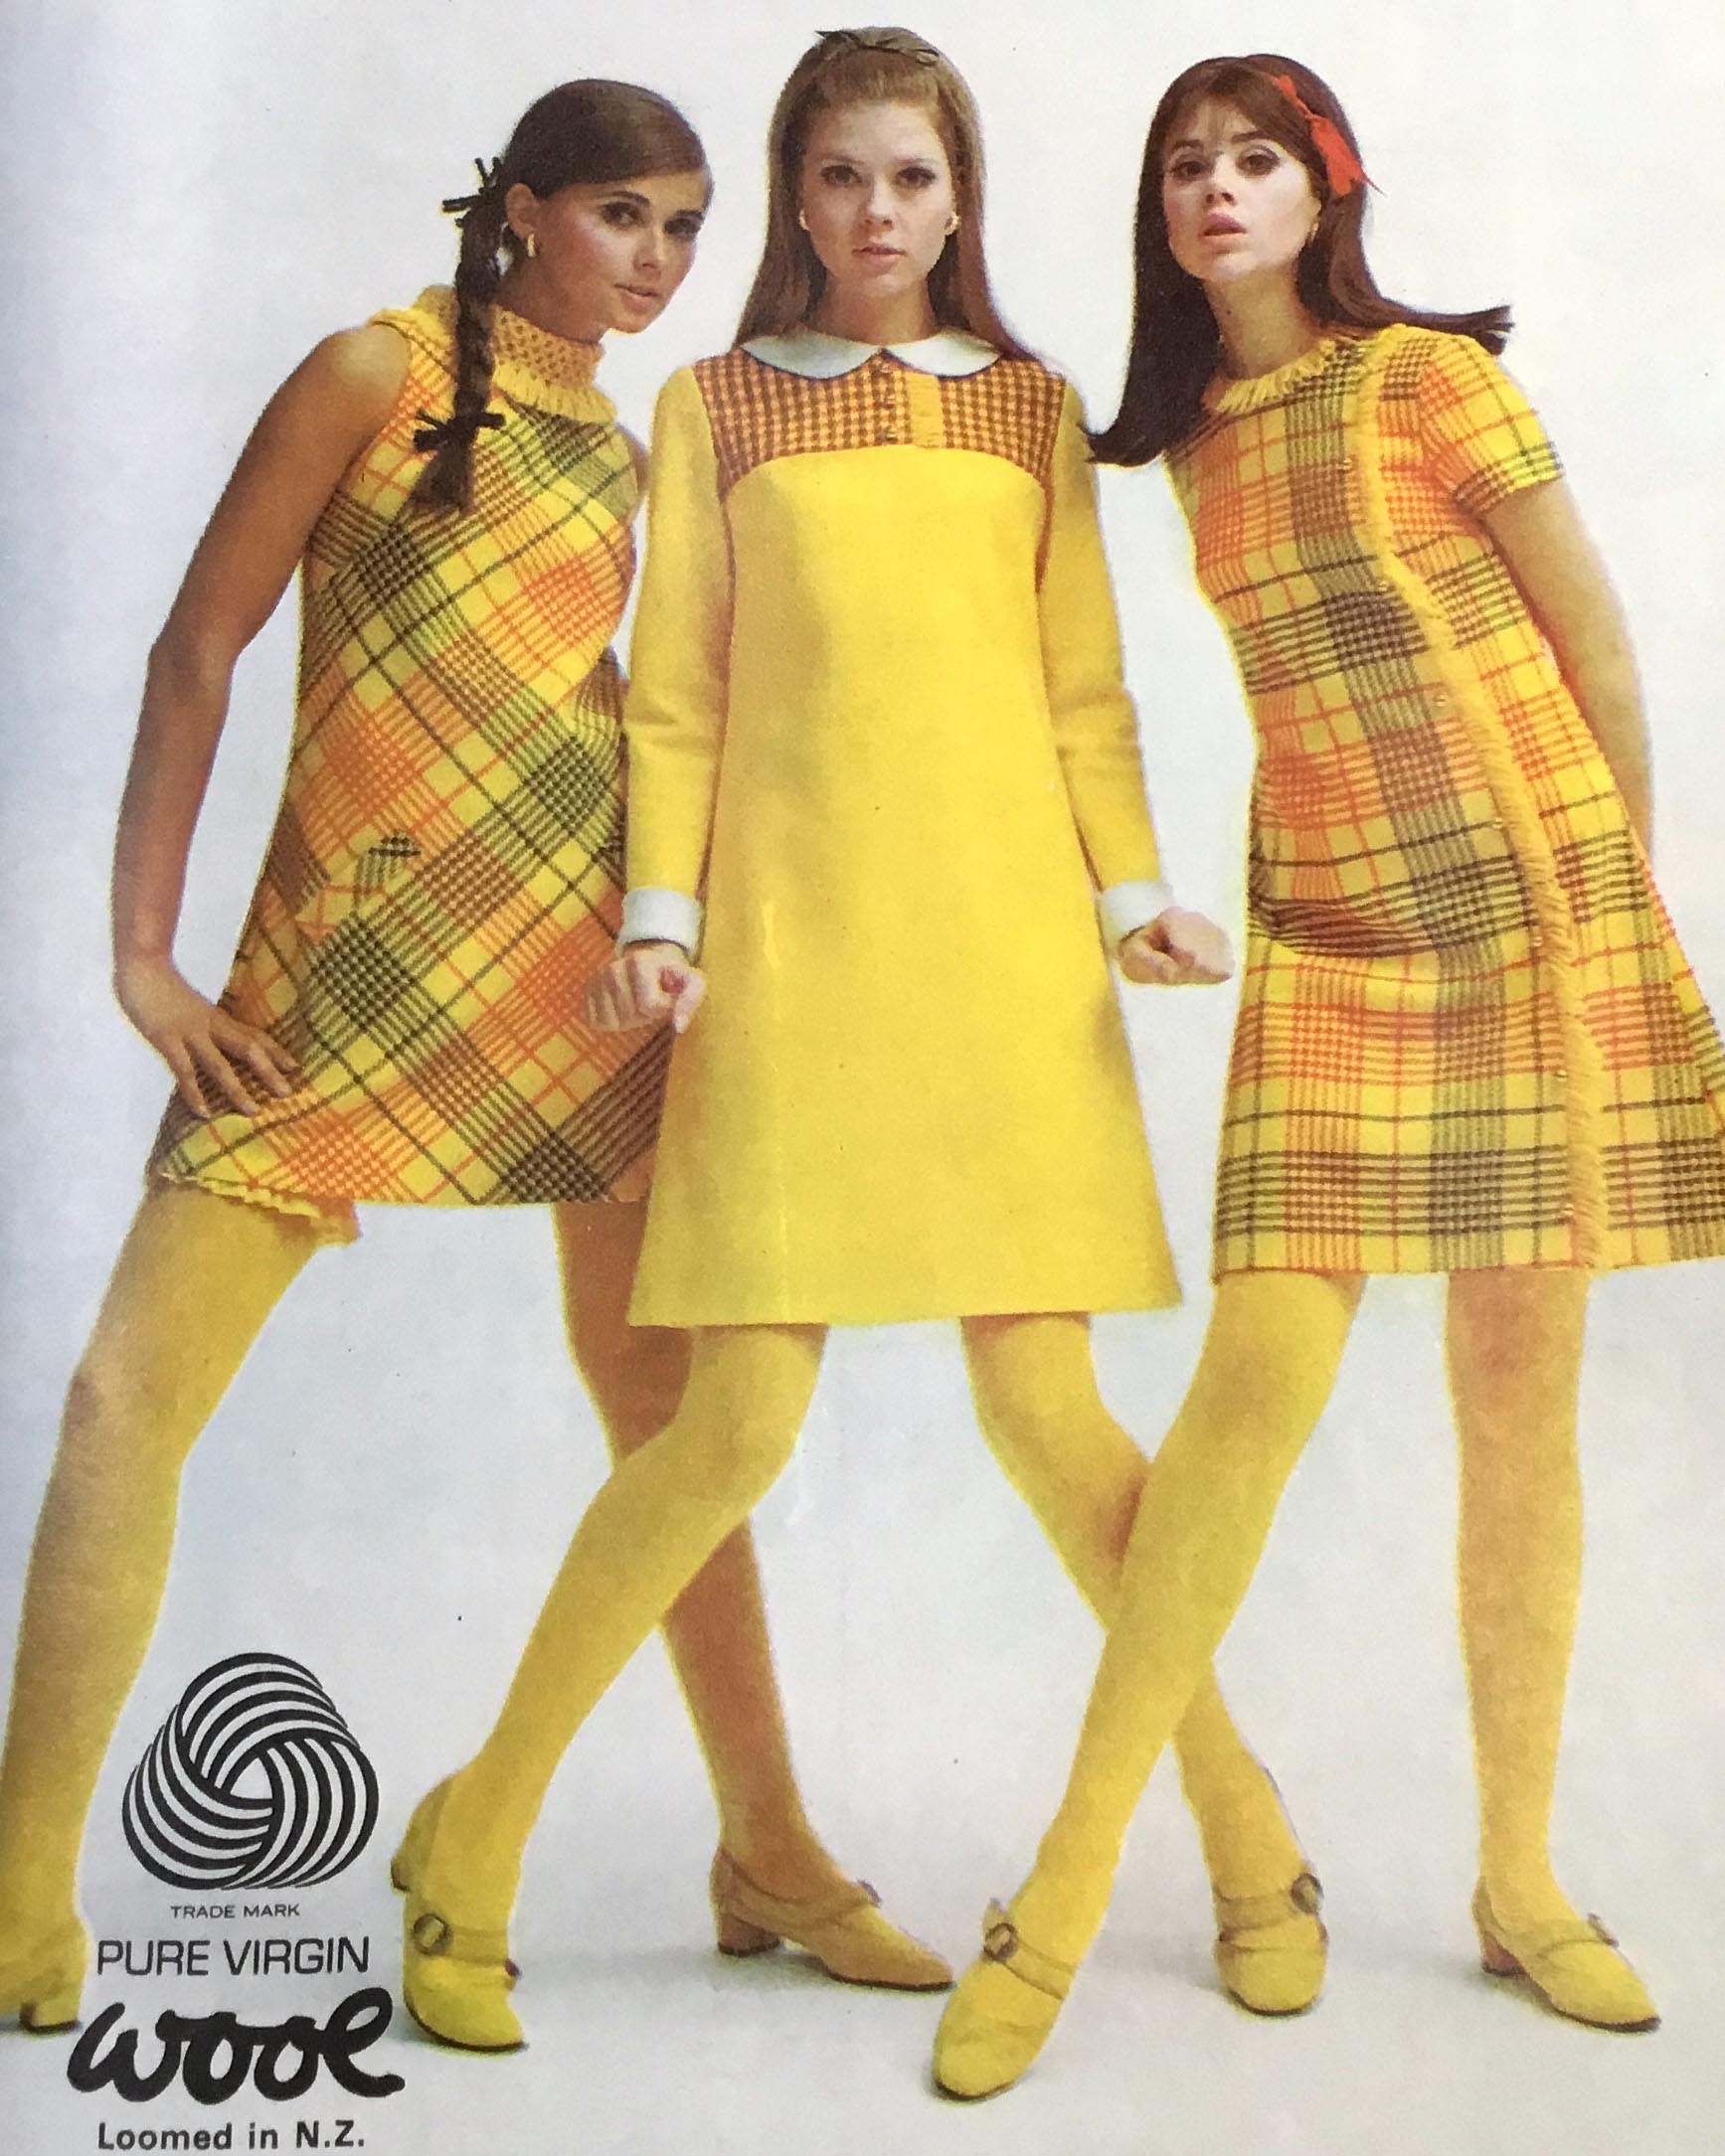 Swinging Sixties in Auckland - How Quant Sparked Our Boutique Culture